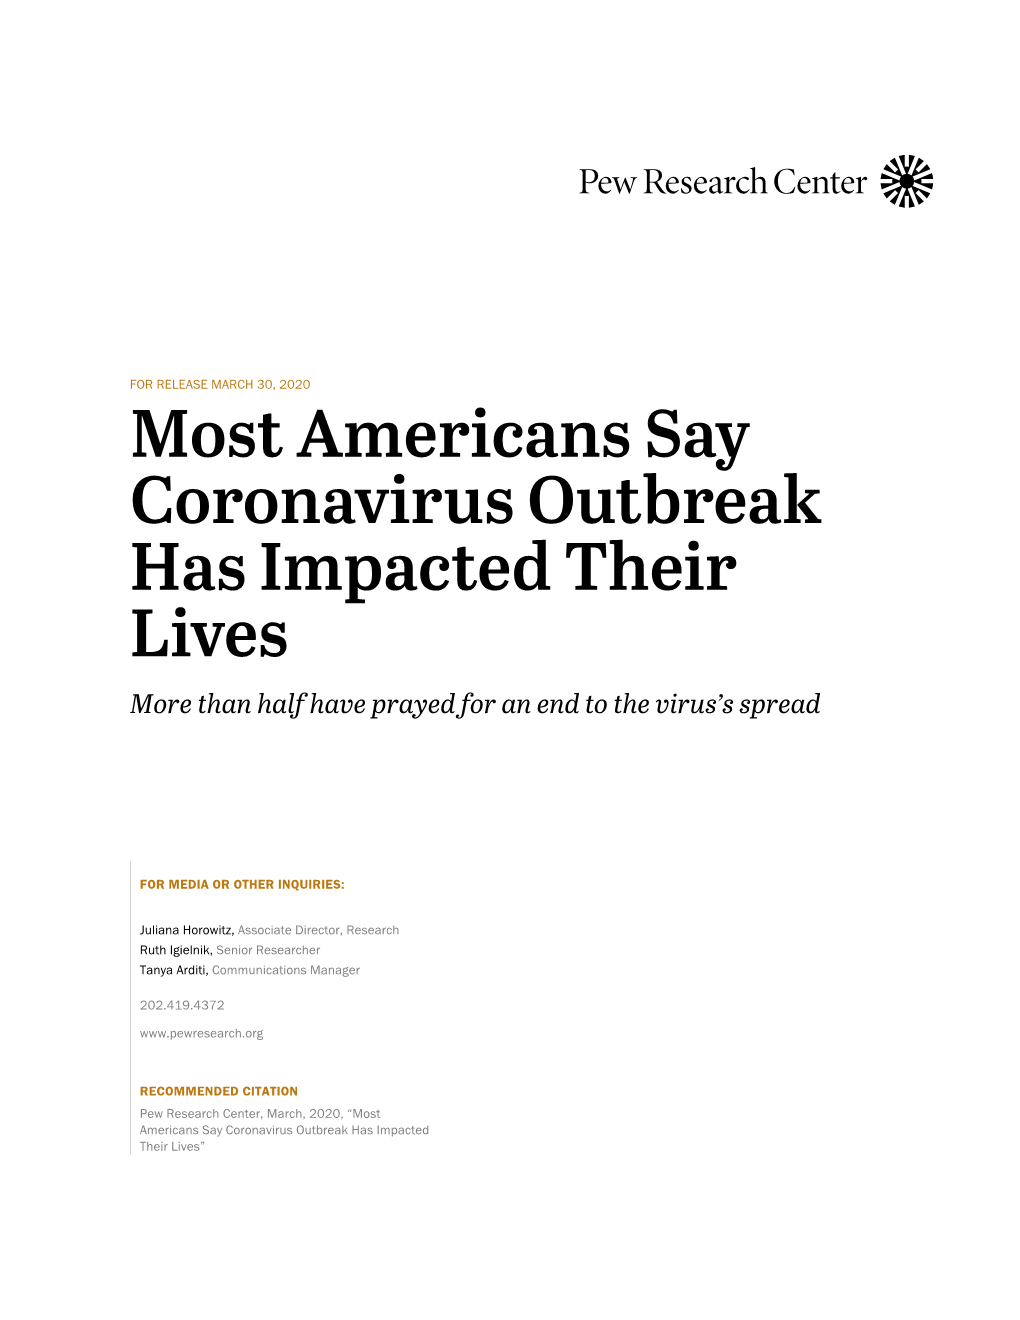 Most Americans Say Coronavirus Outbreak Has Impacted Their Lives